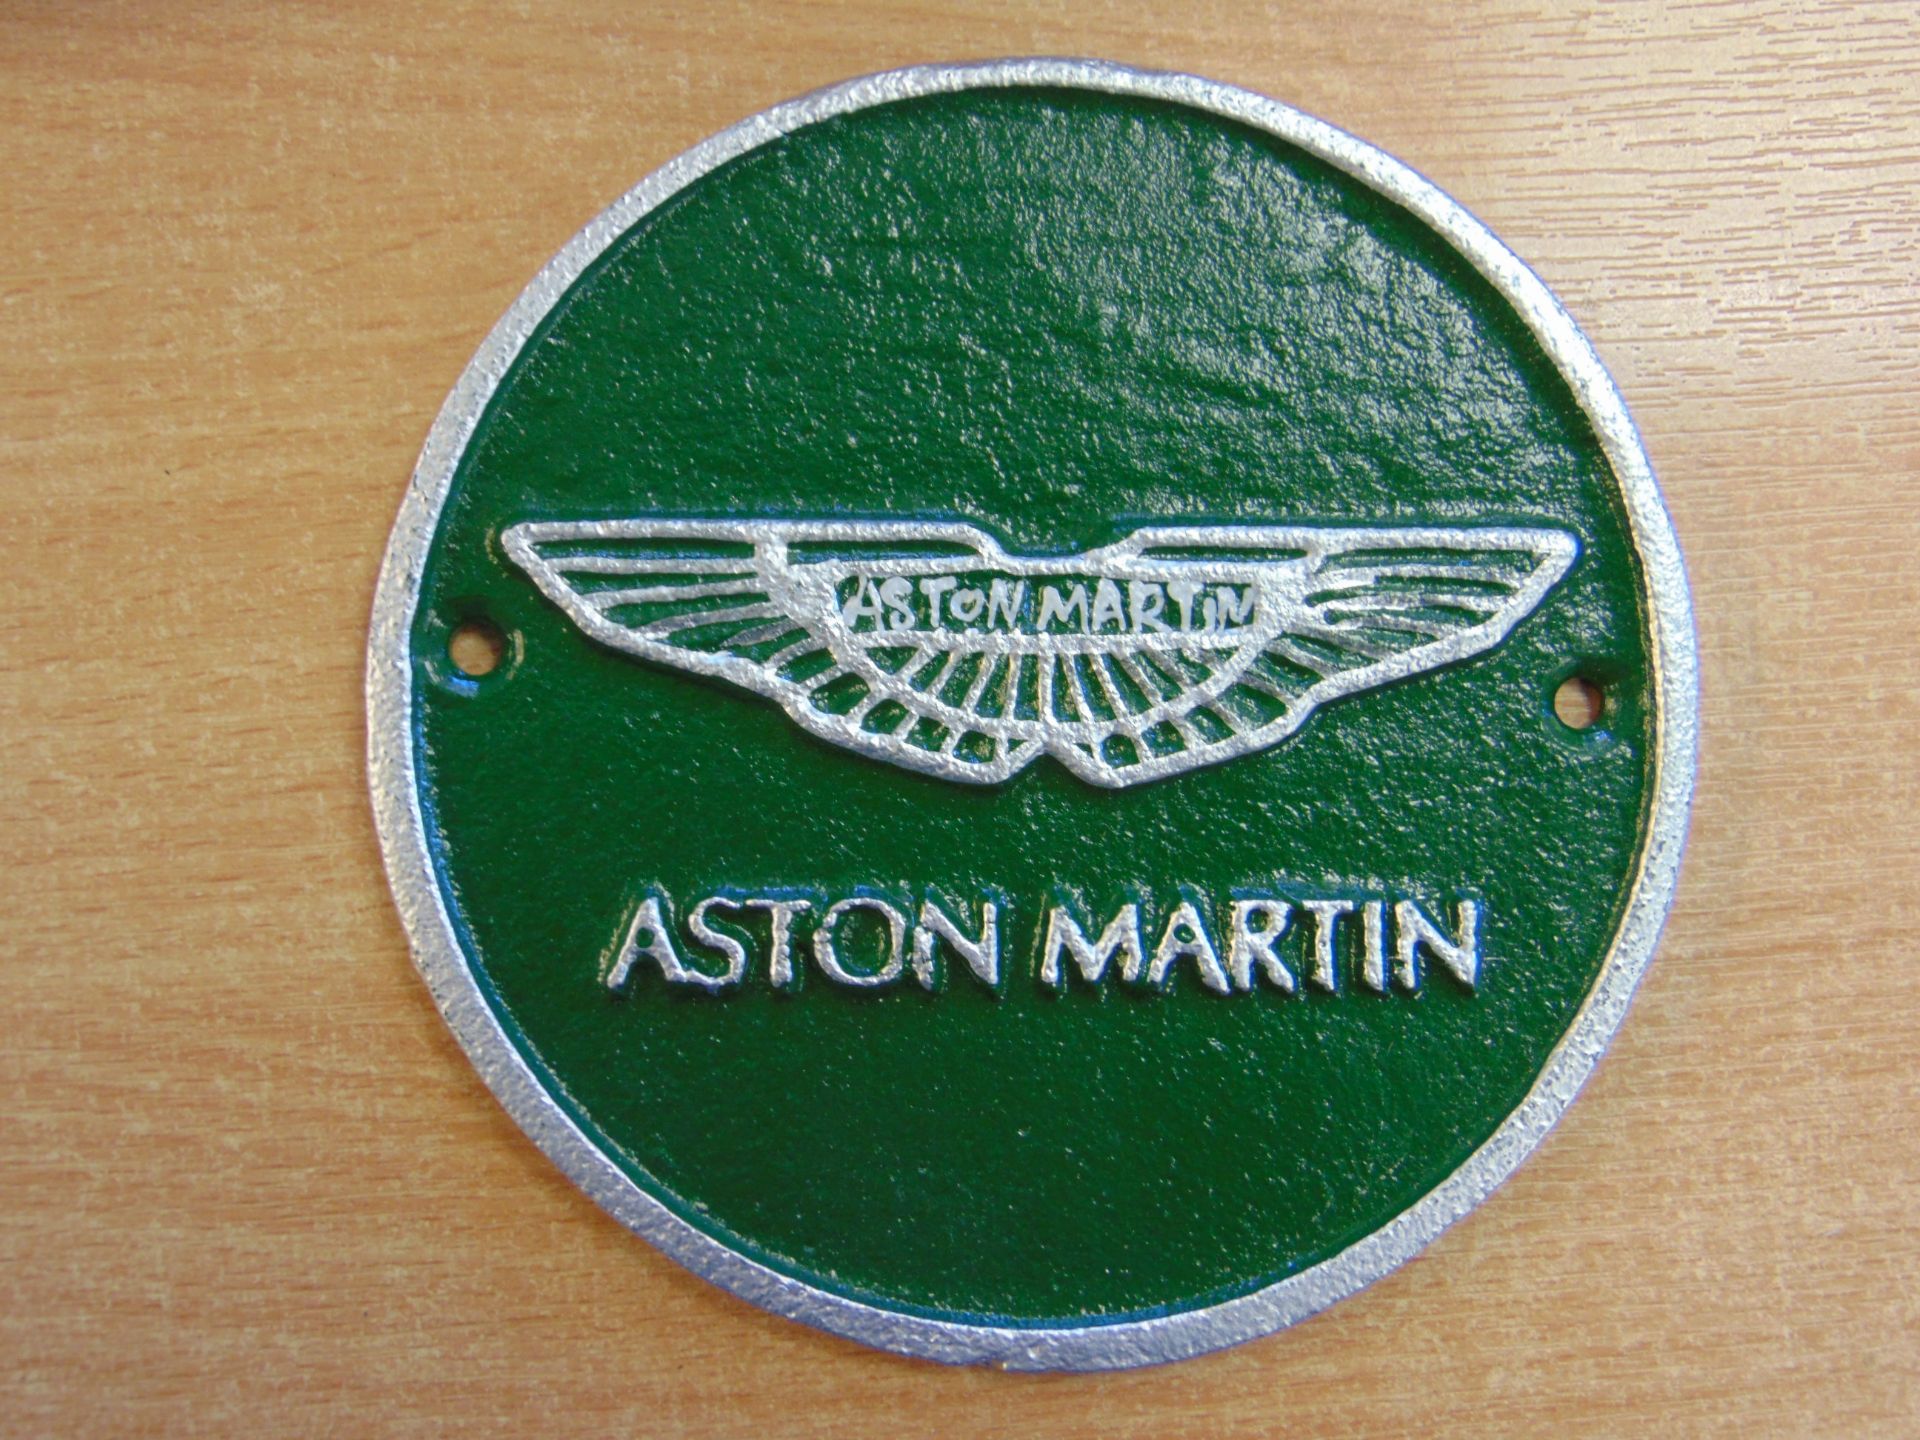 ASTON MARTIN HAND PAINTED CAST IRON WALL PLAQUE 12CMS DIA. - Image 4 of 4